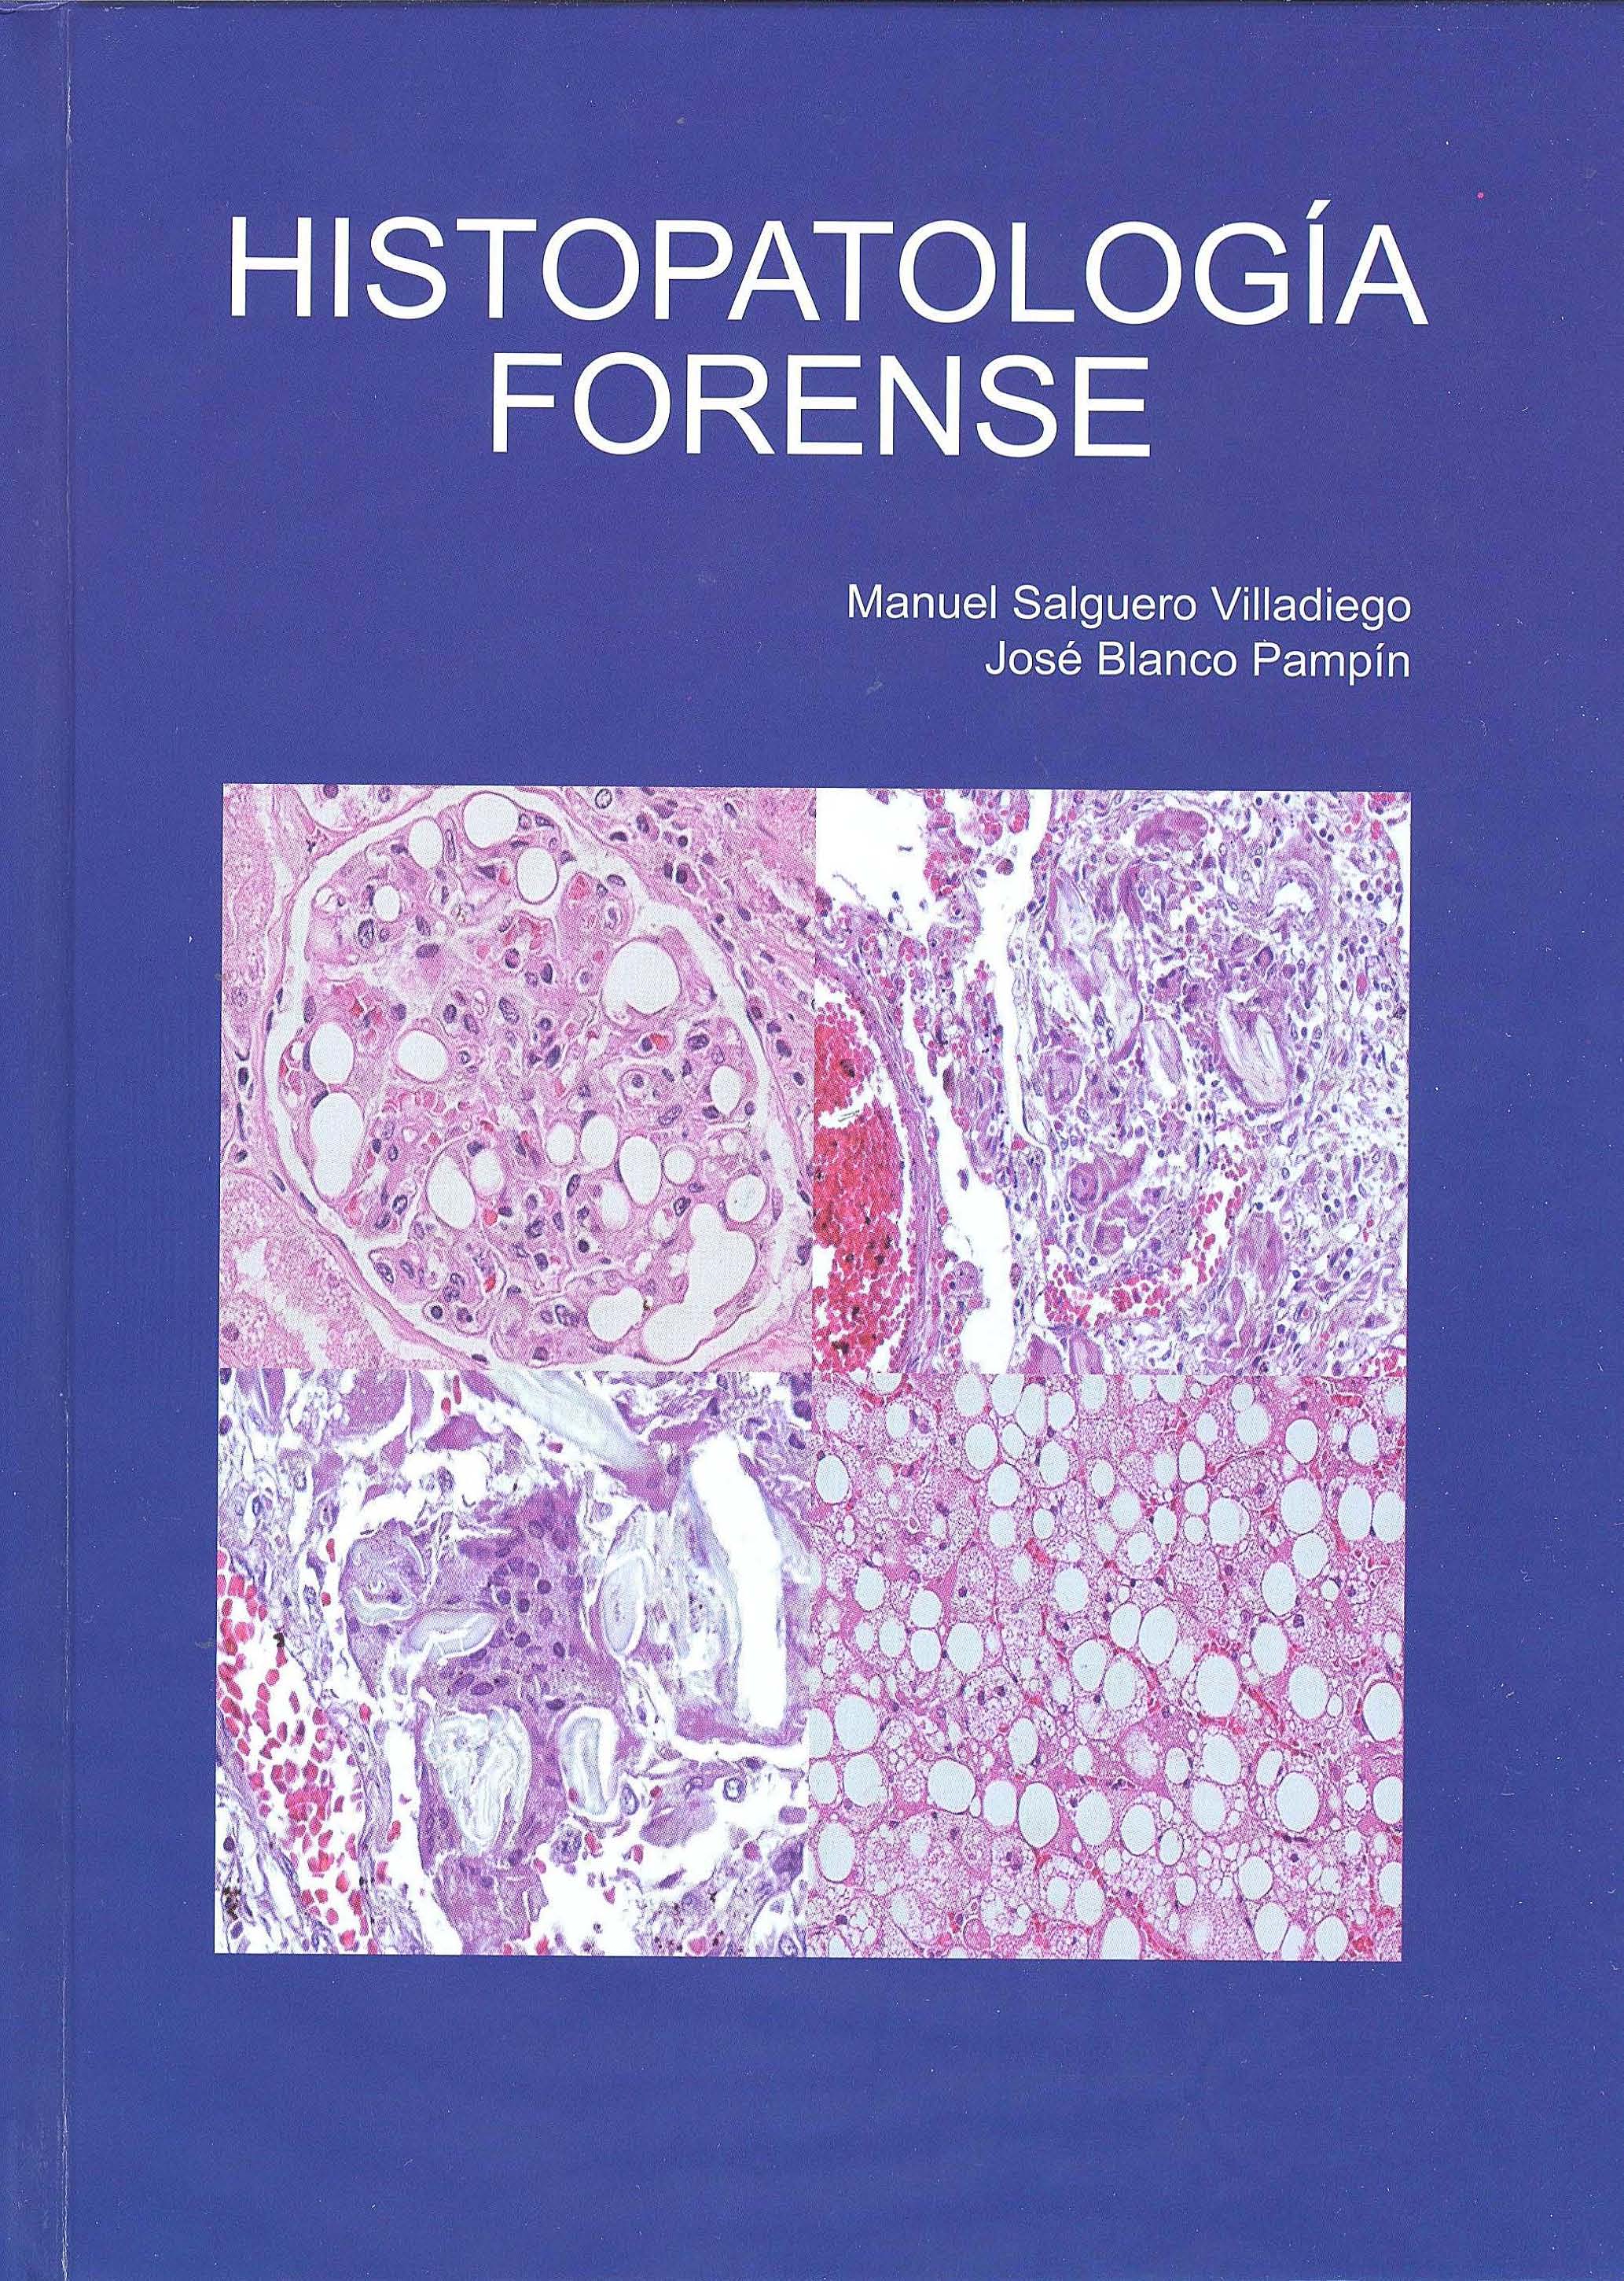 View details of HISTOPATOLOGÍA FORENSE, 2015